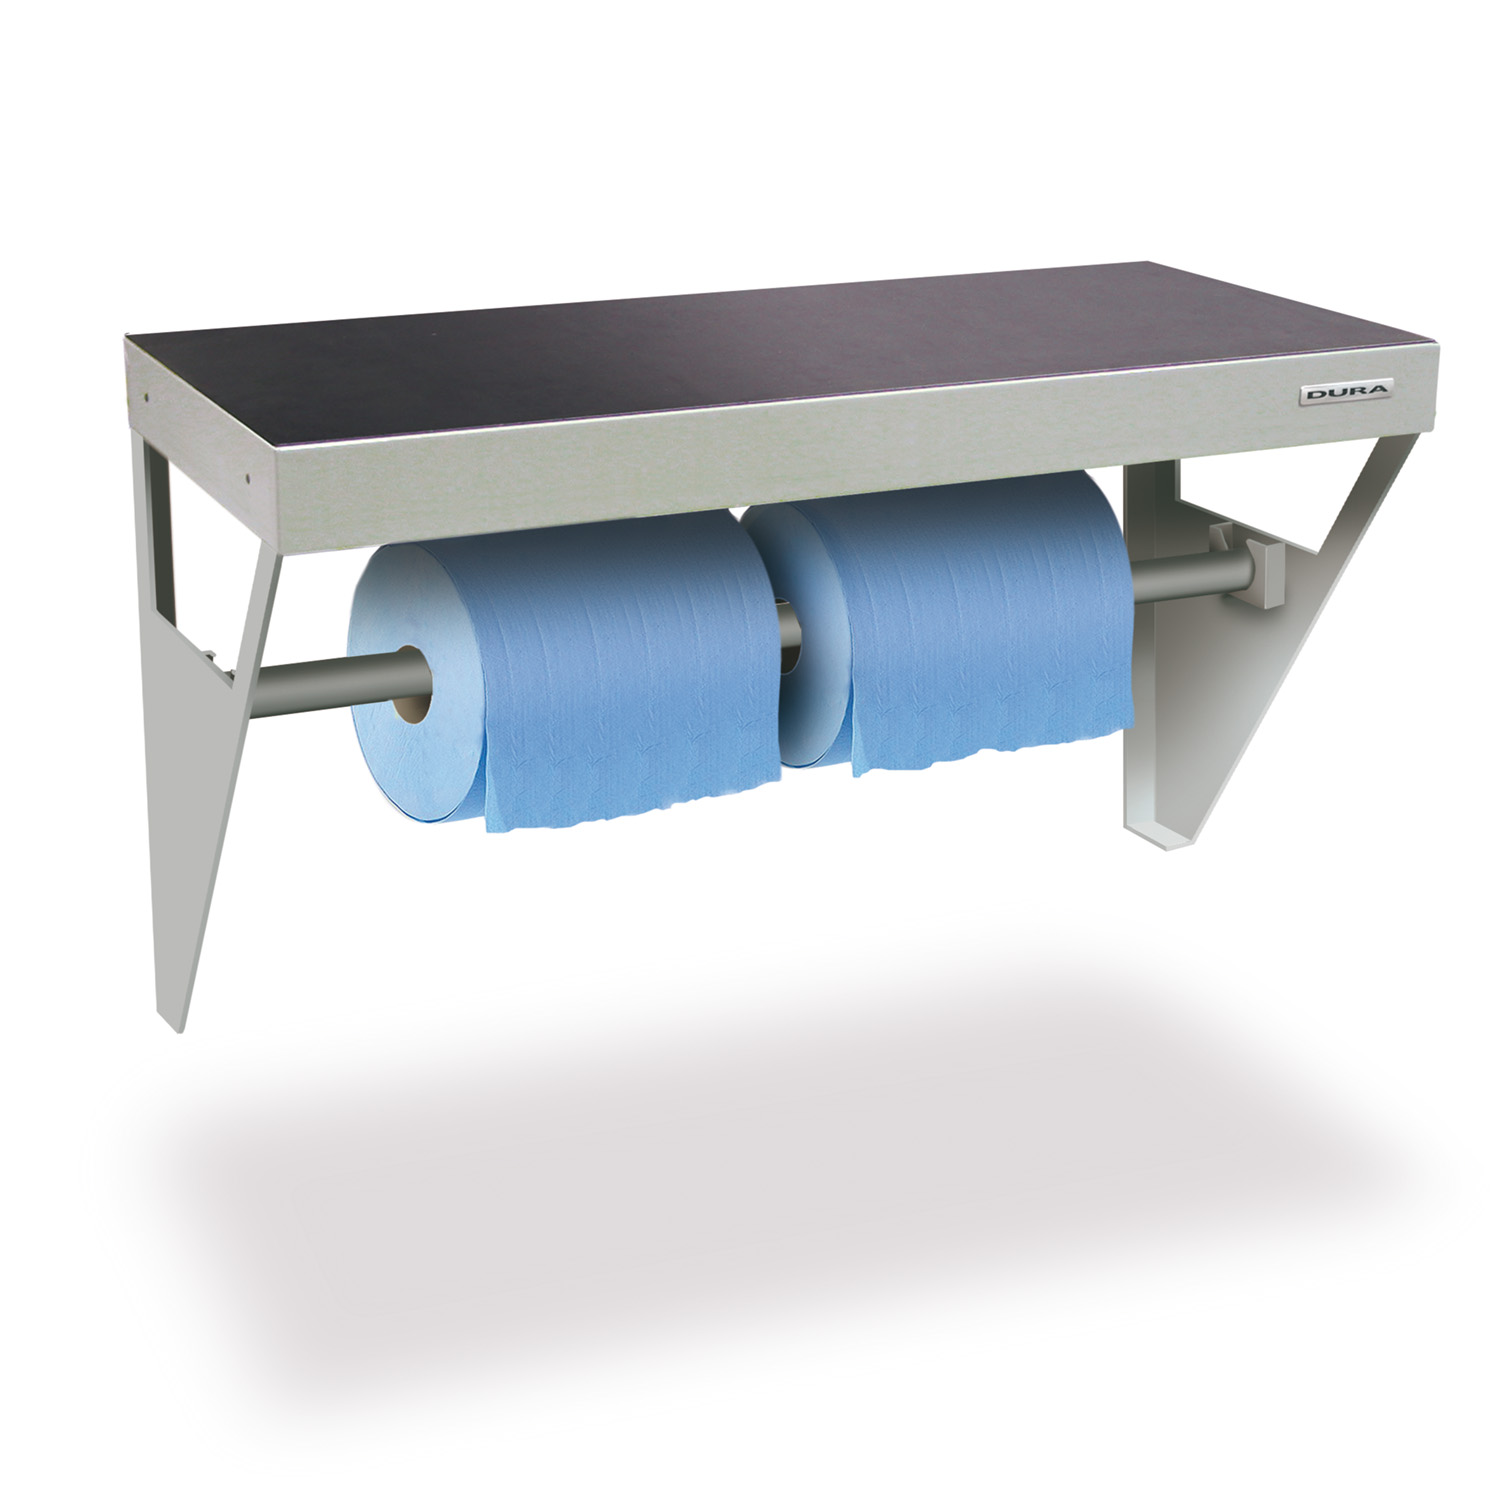 Wall-mounted workbench with roll holder